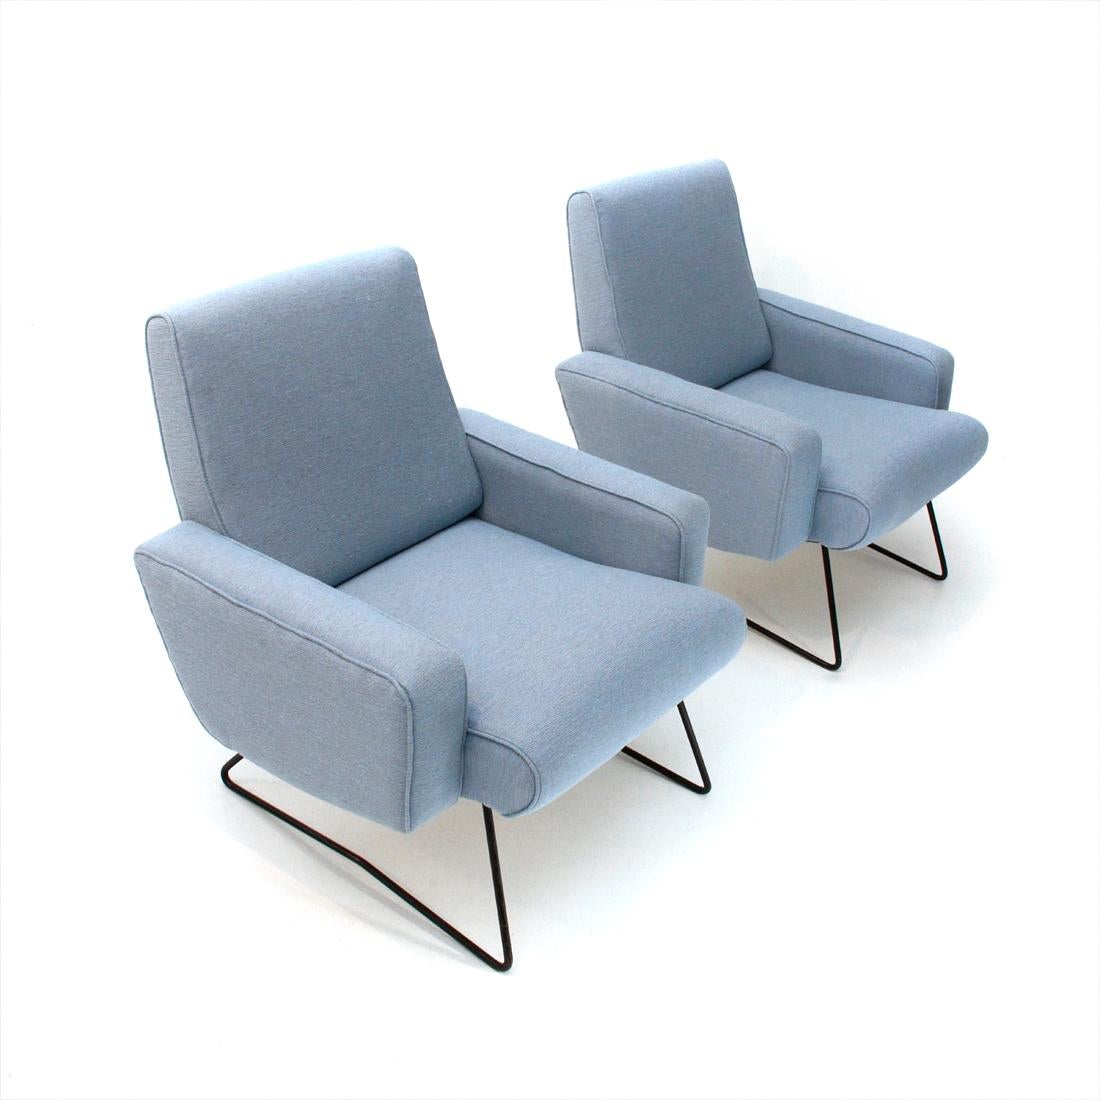 Pair of armchairs Italian manufacturing produced in 1960s
Wooden structure padded and lined in light blue fabric.
Good general conditions, some signs due to normal use over time.

Dimensions: Length 70 cm, depth 70 cm, height 75 cm, seat height